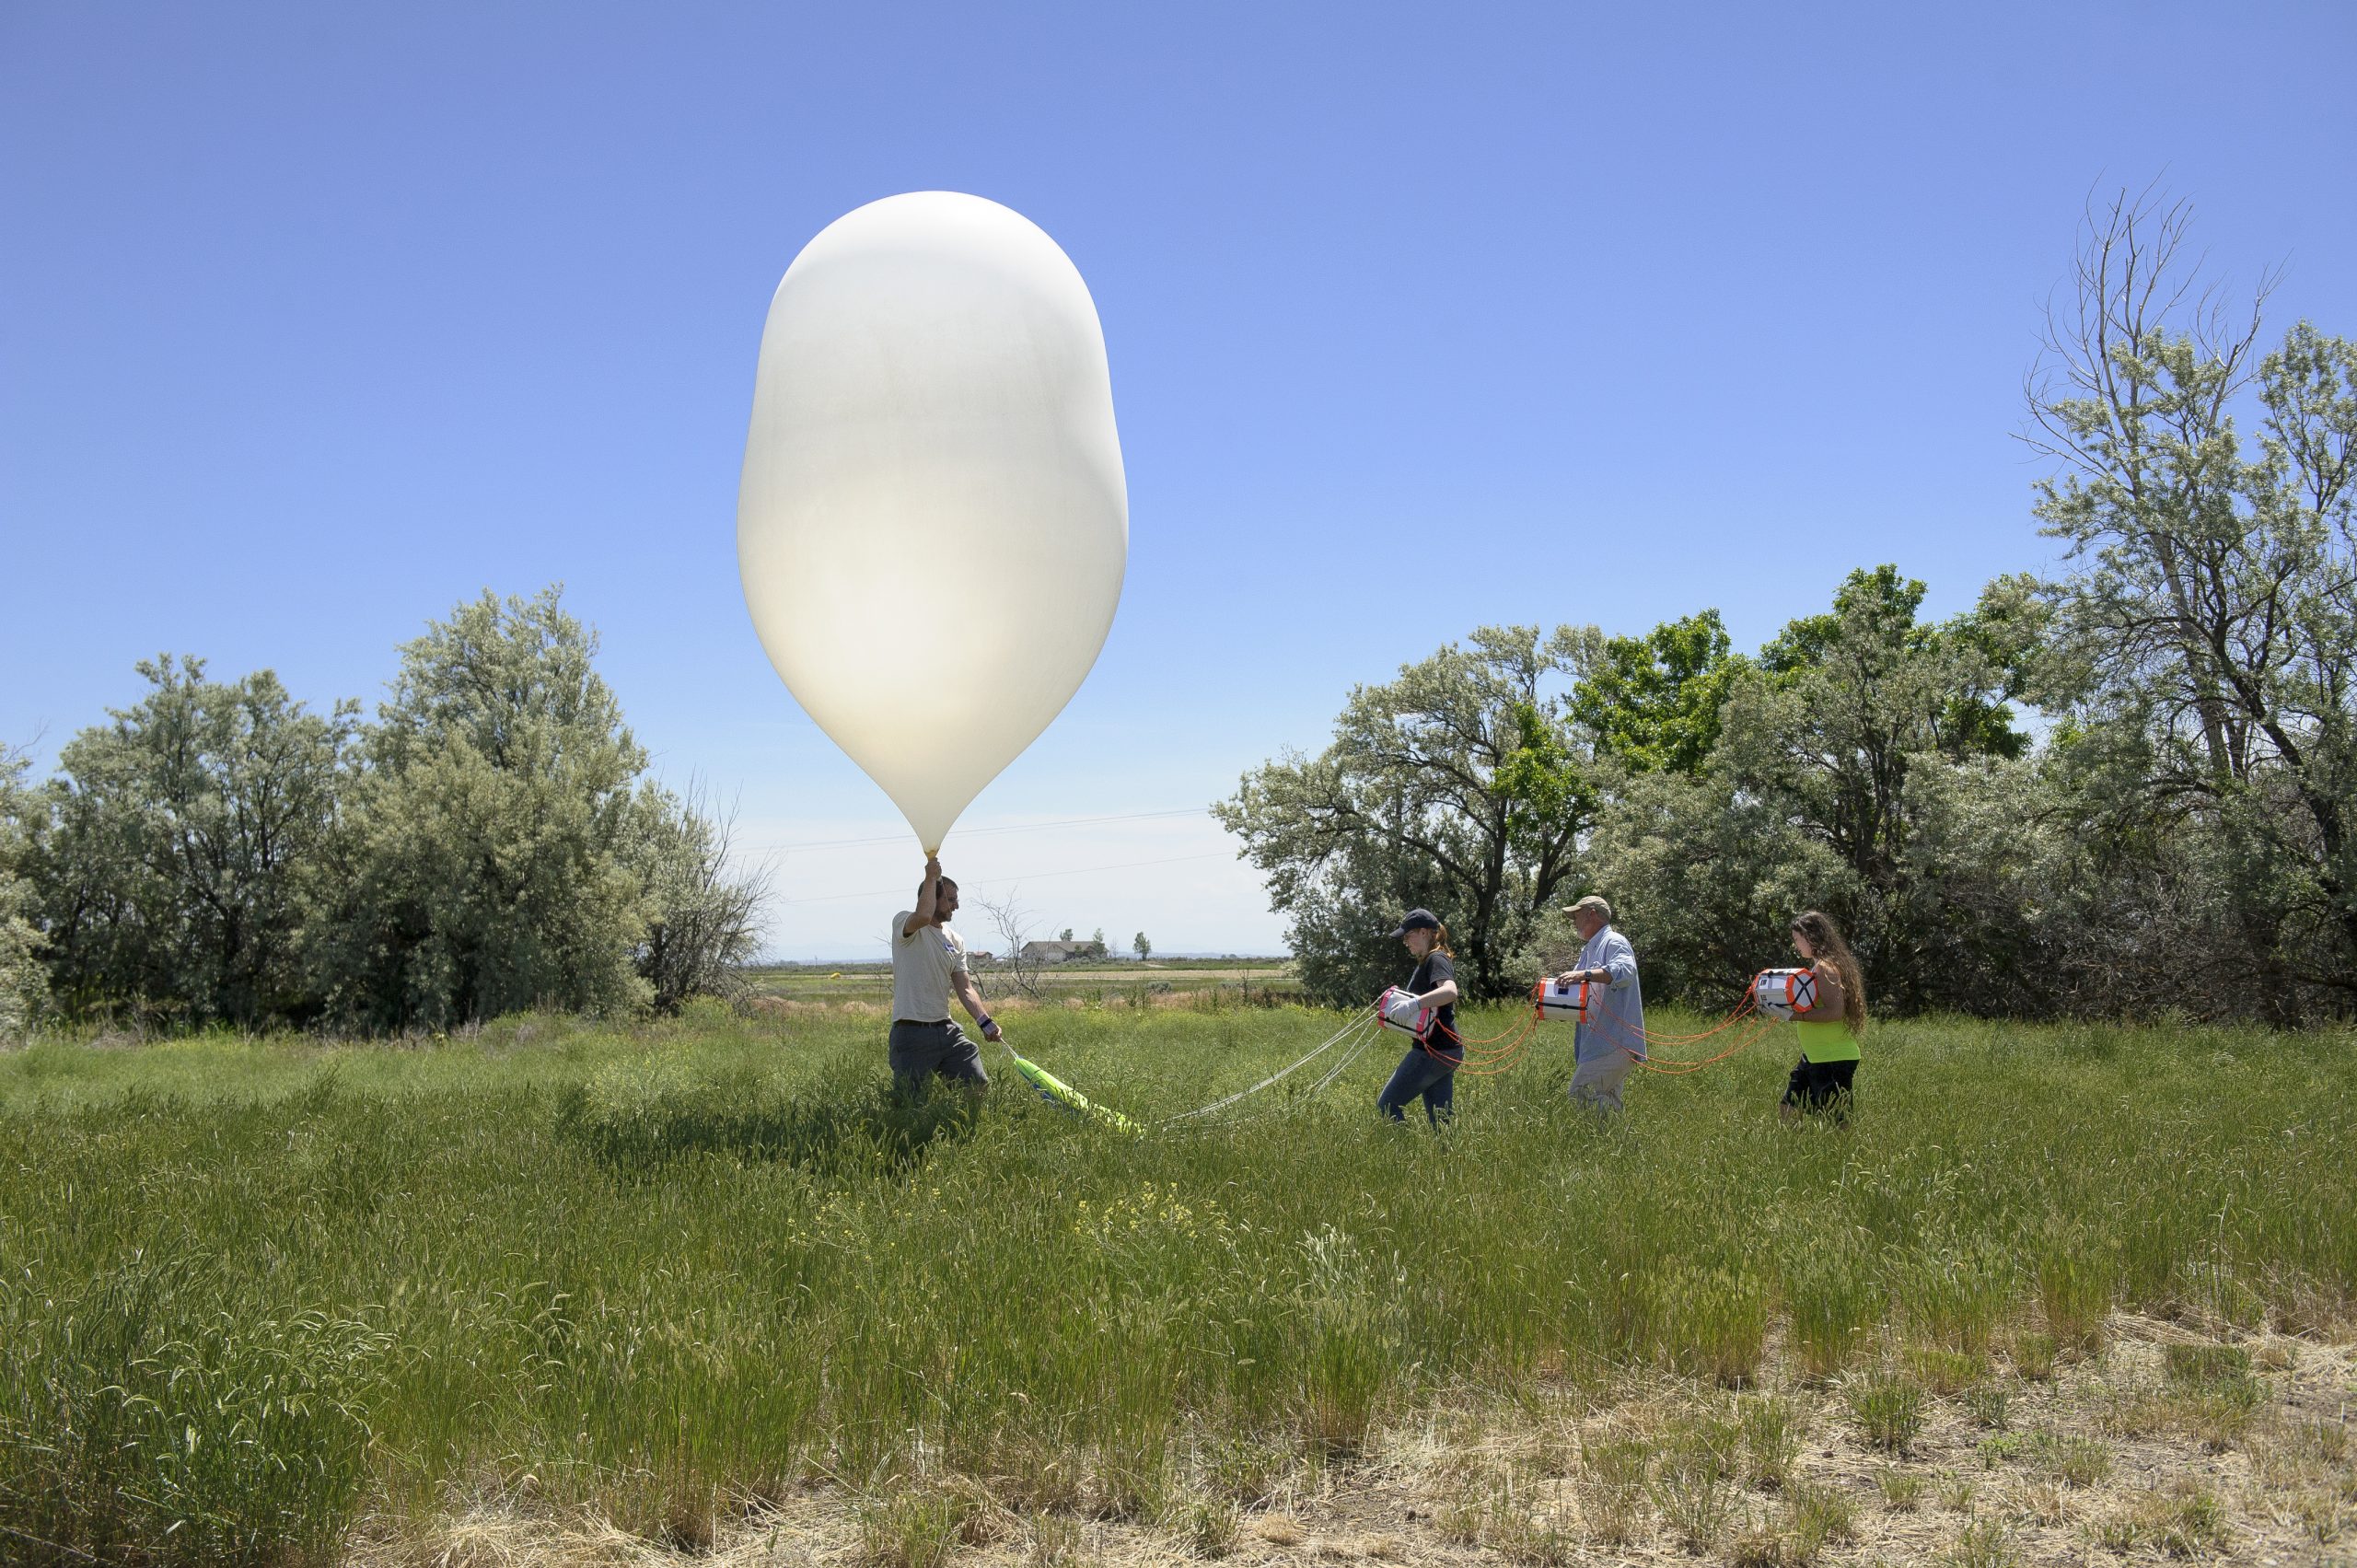 NASA is launching massive balloons that contain bacteria during the eclipse